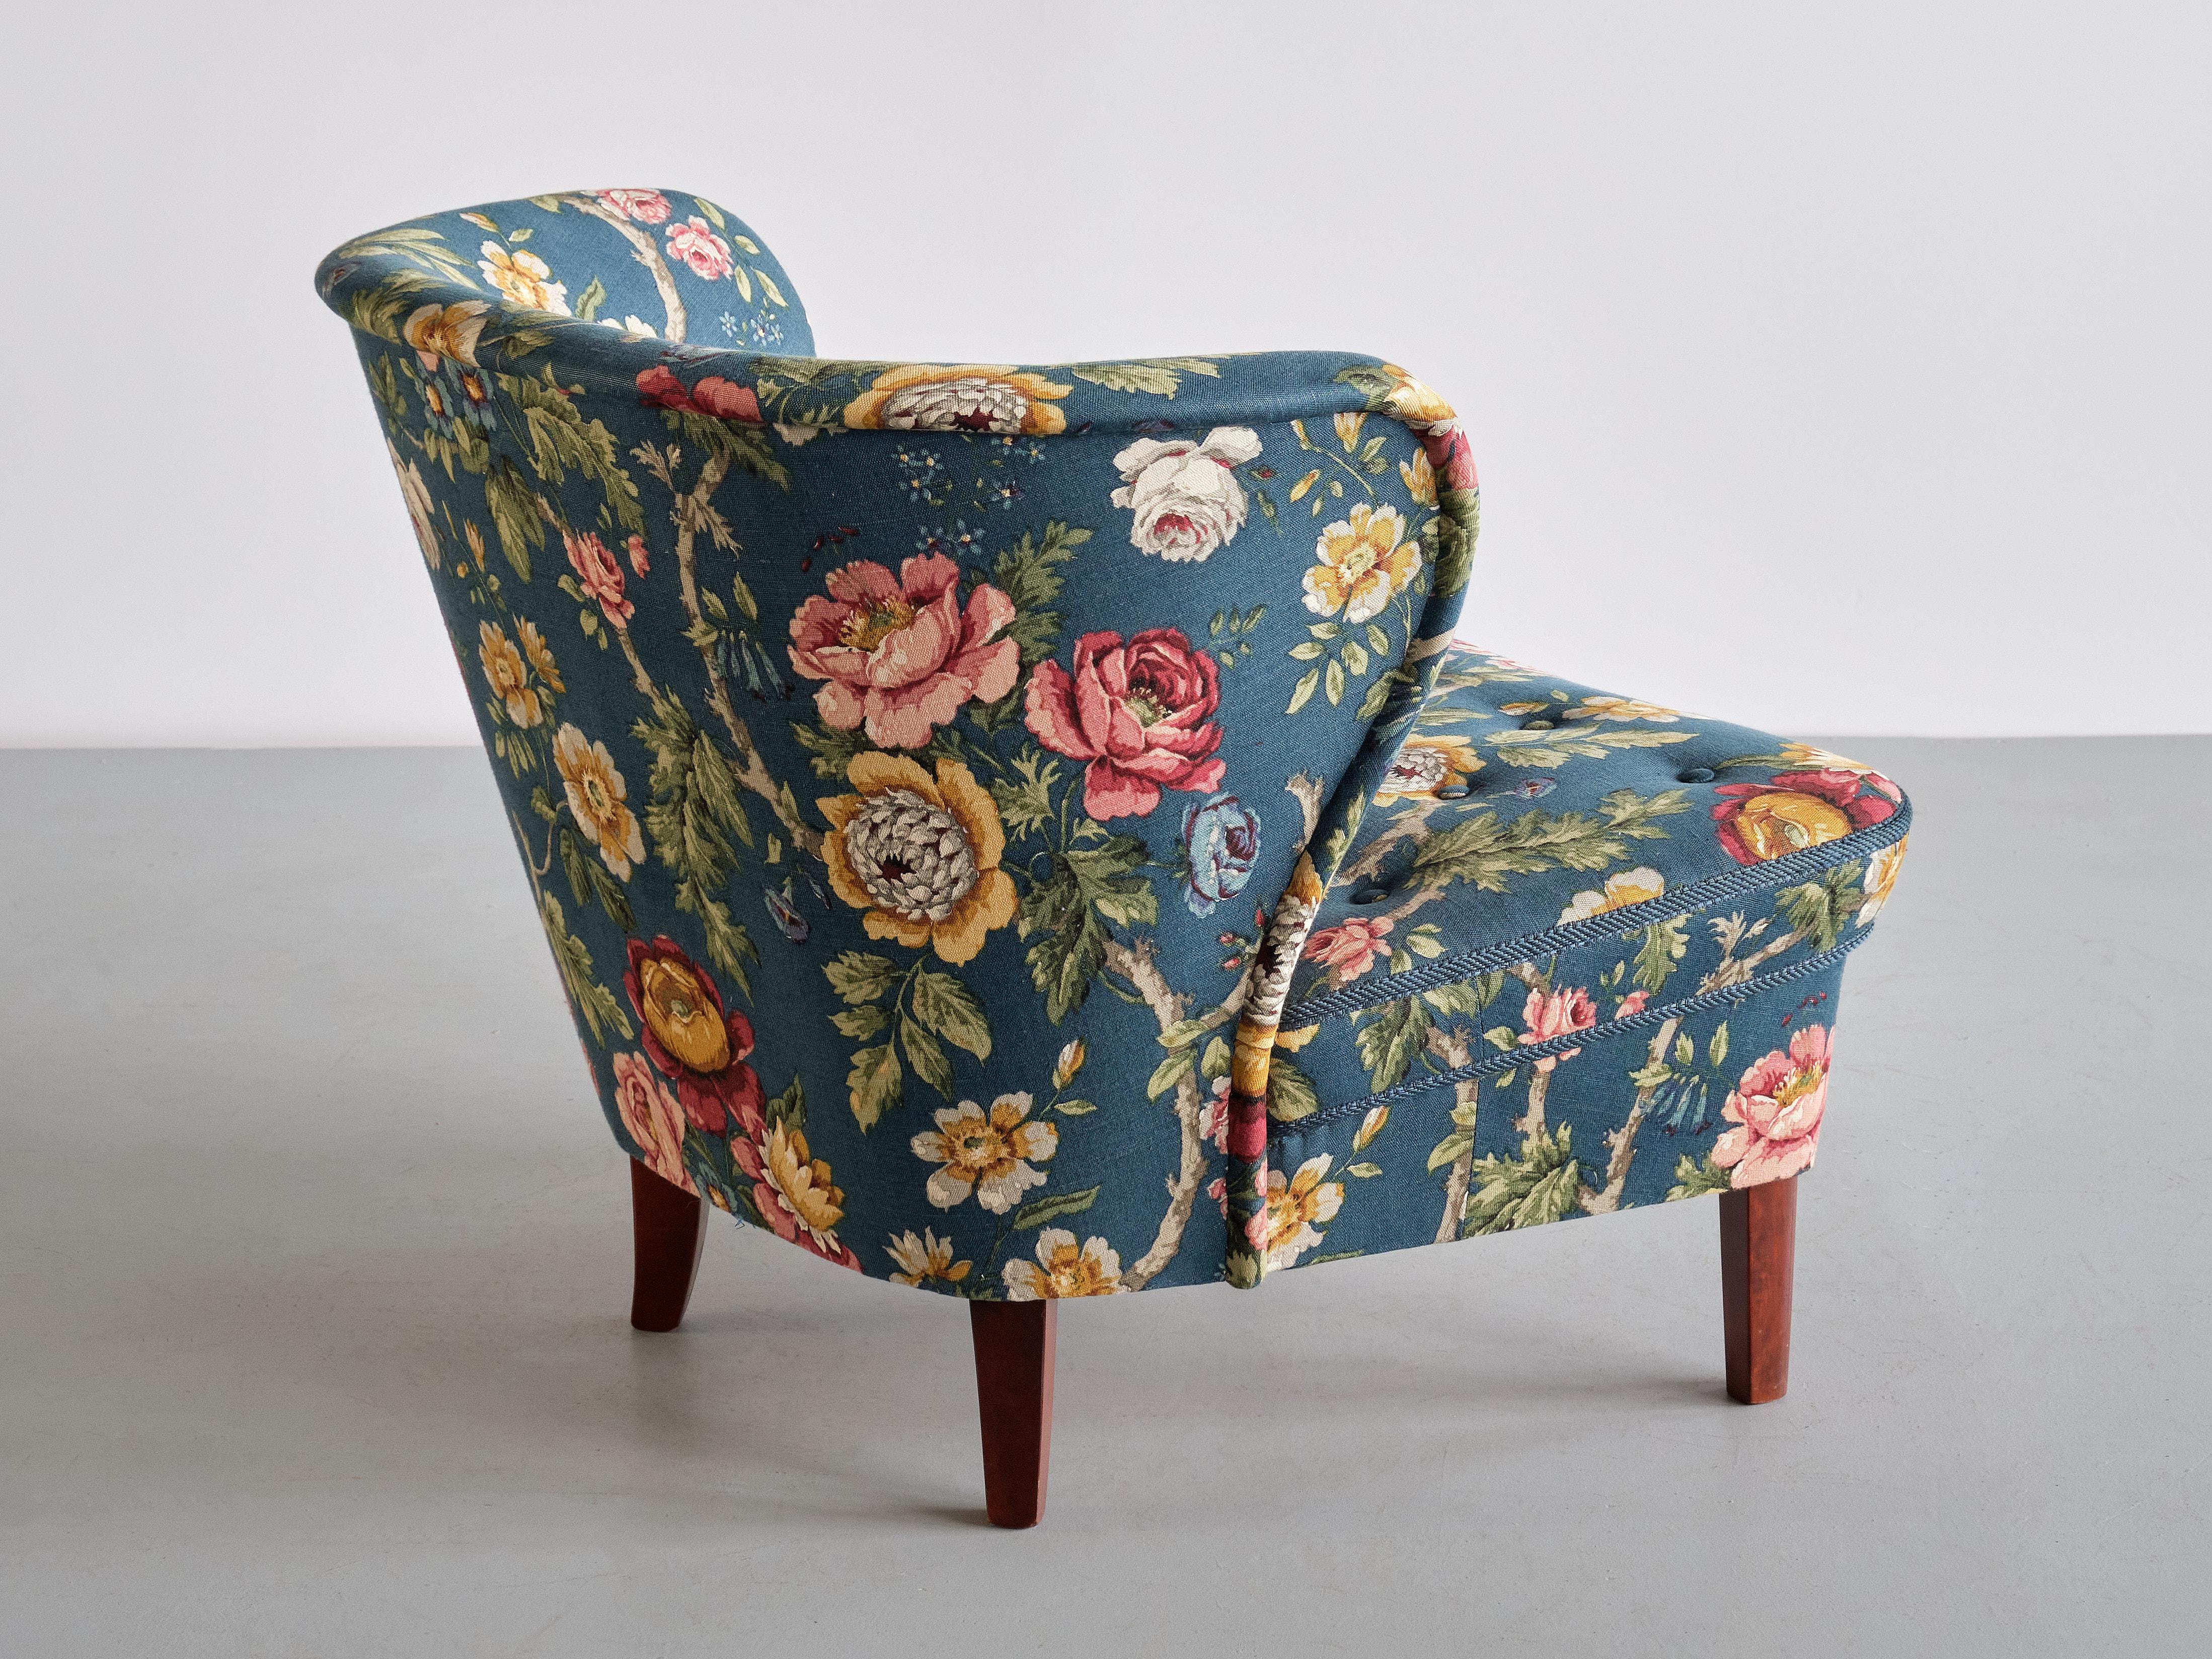 Gösta Jonsson Lounge Chair in Floral Fabric and Birch, Sweden, 1940s For Sale 3